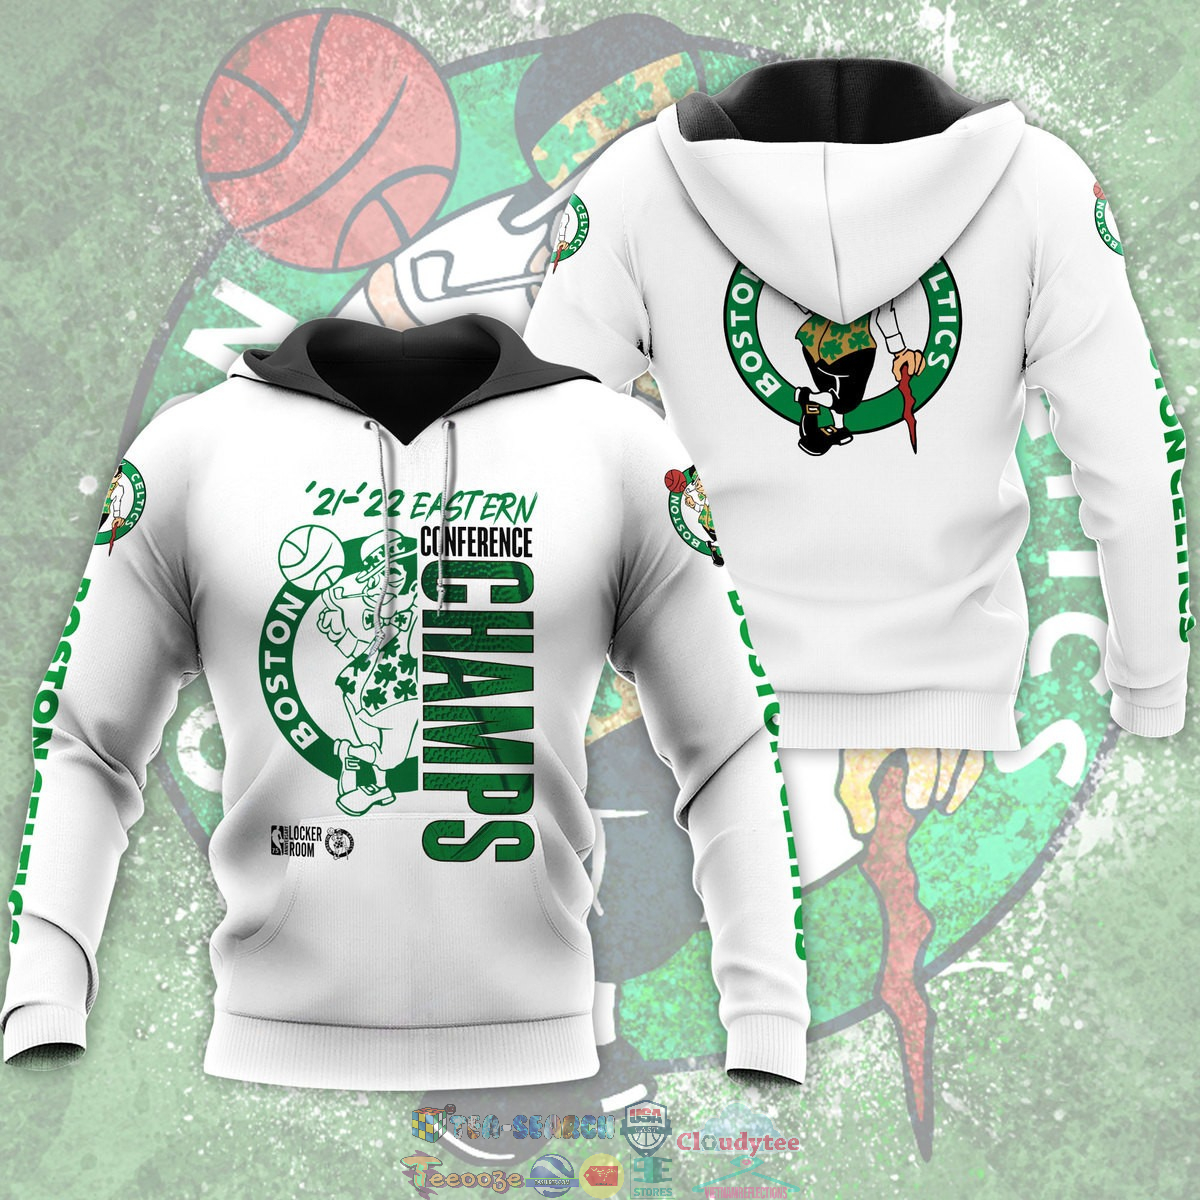 21-22 Eastern Conferrence Champs Boston Celtics White 3D hoodie and t-shirt – Saleoff